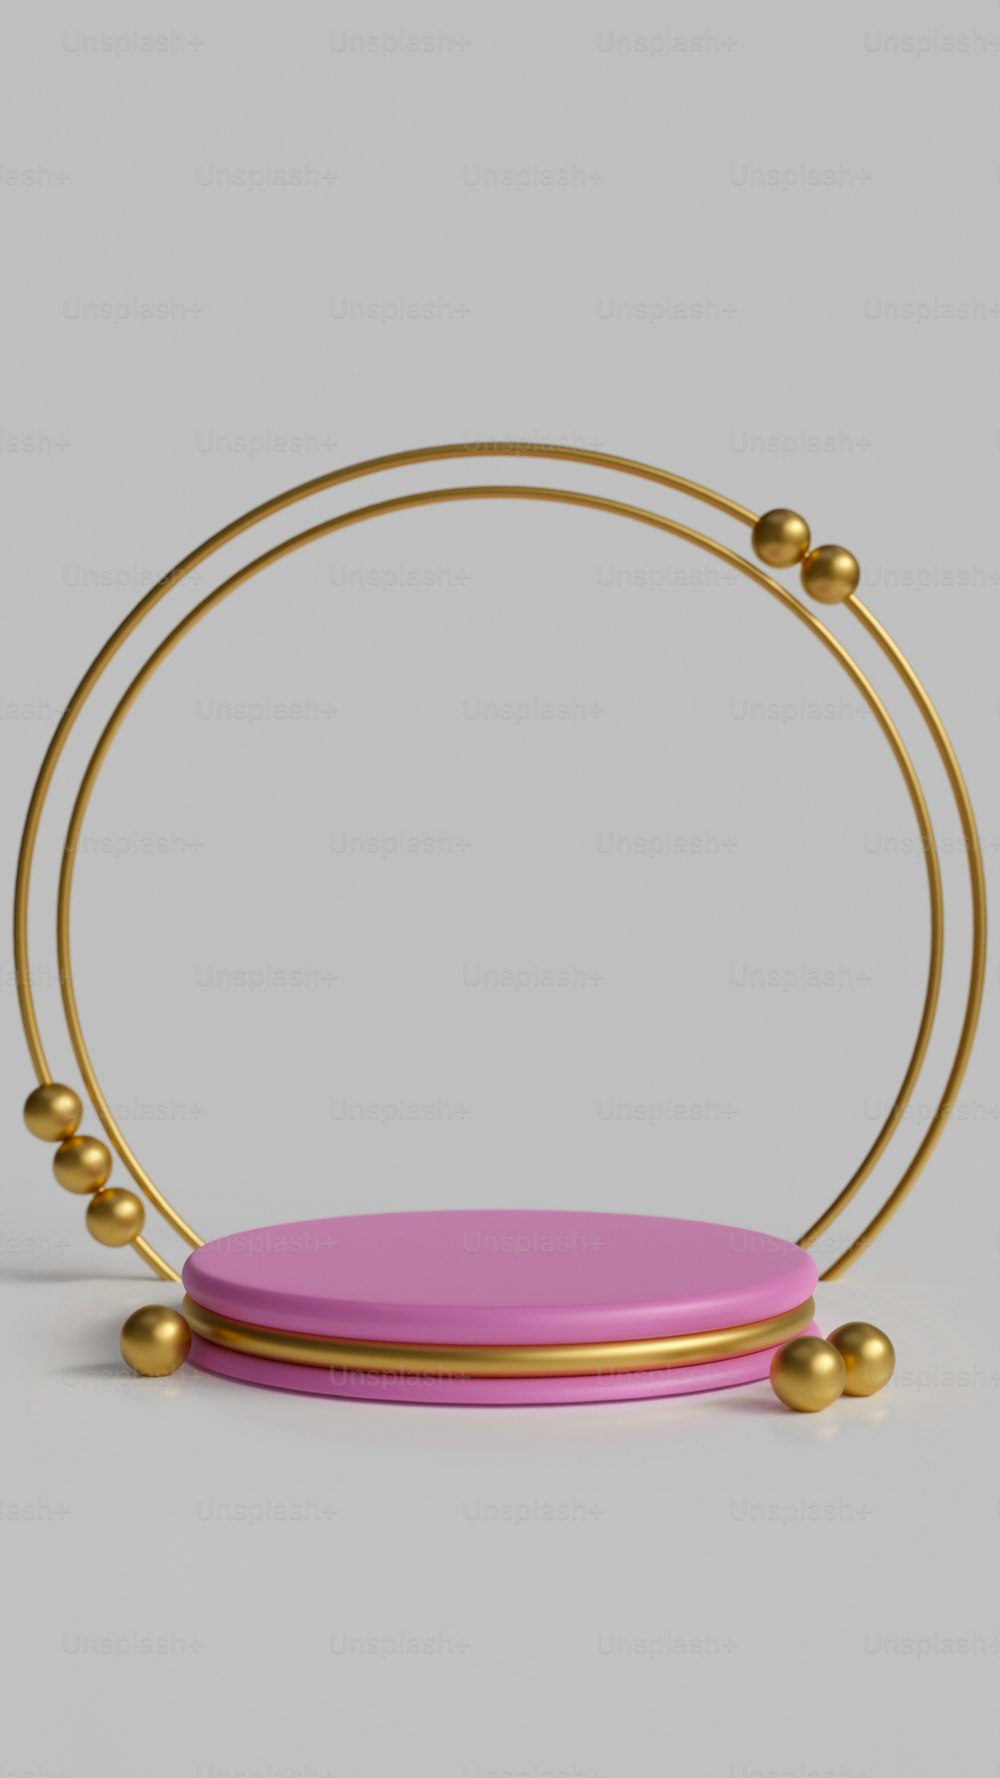 a pink object with gold balls around it